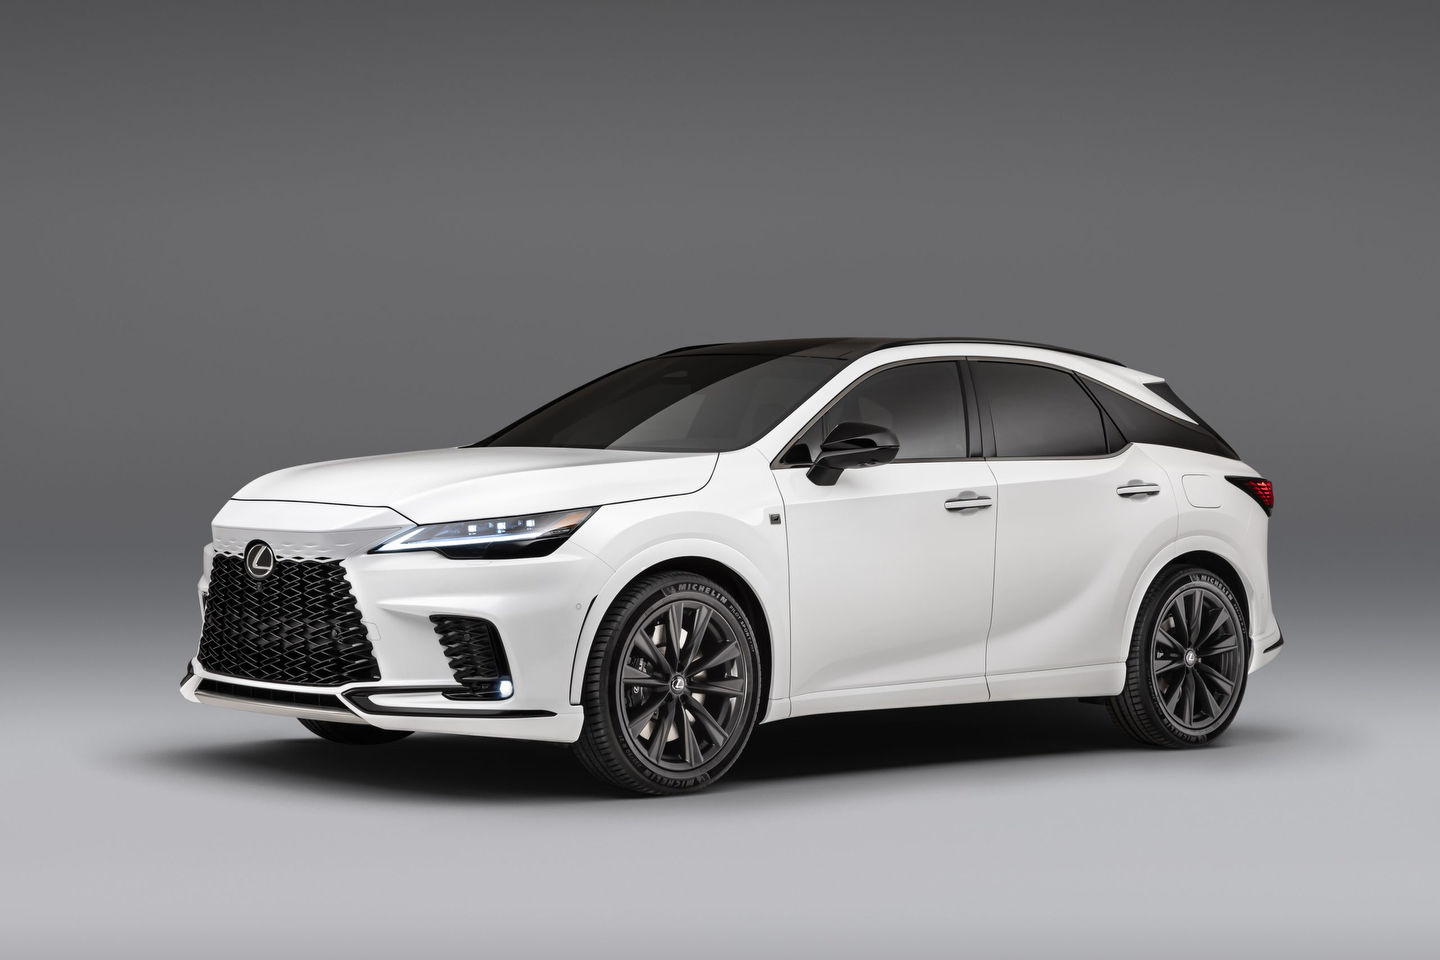 This is the all-new 2023 Lexus RX